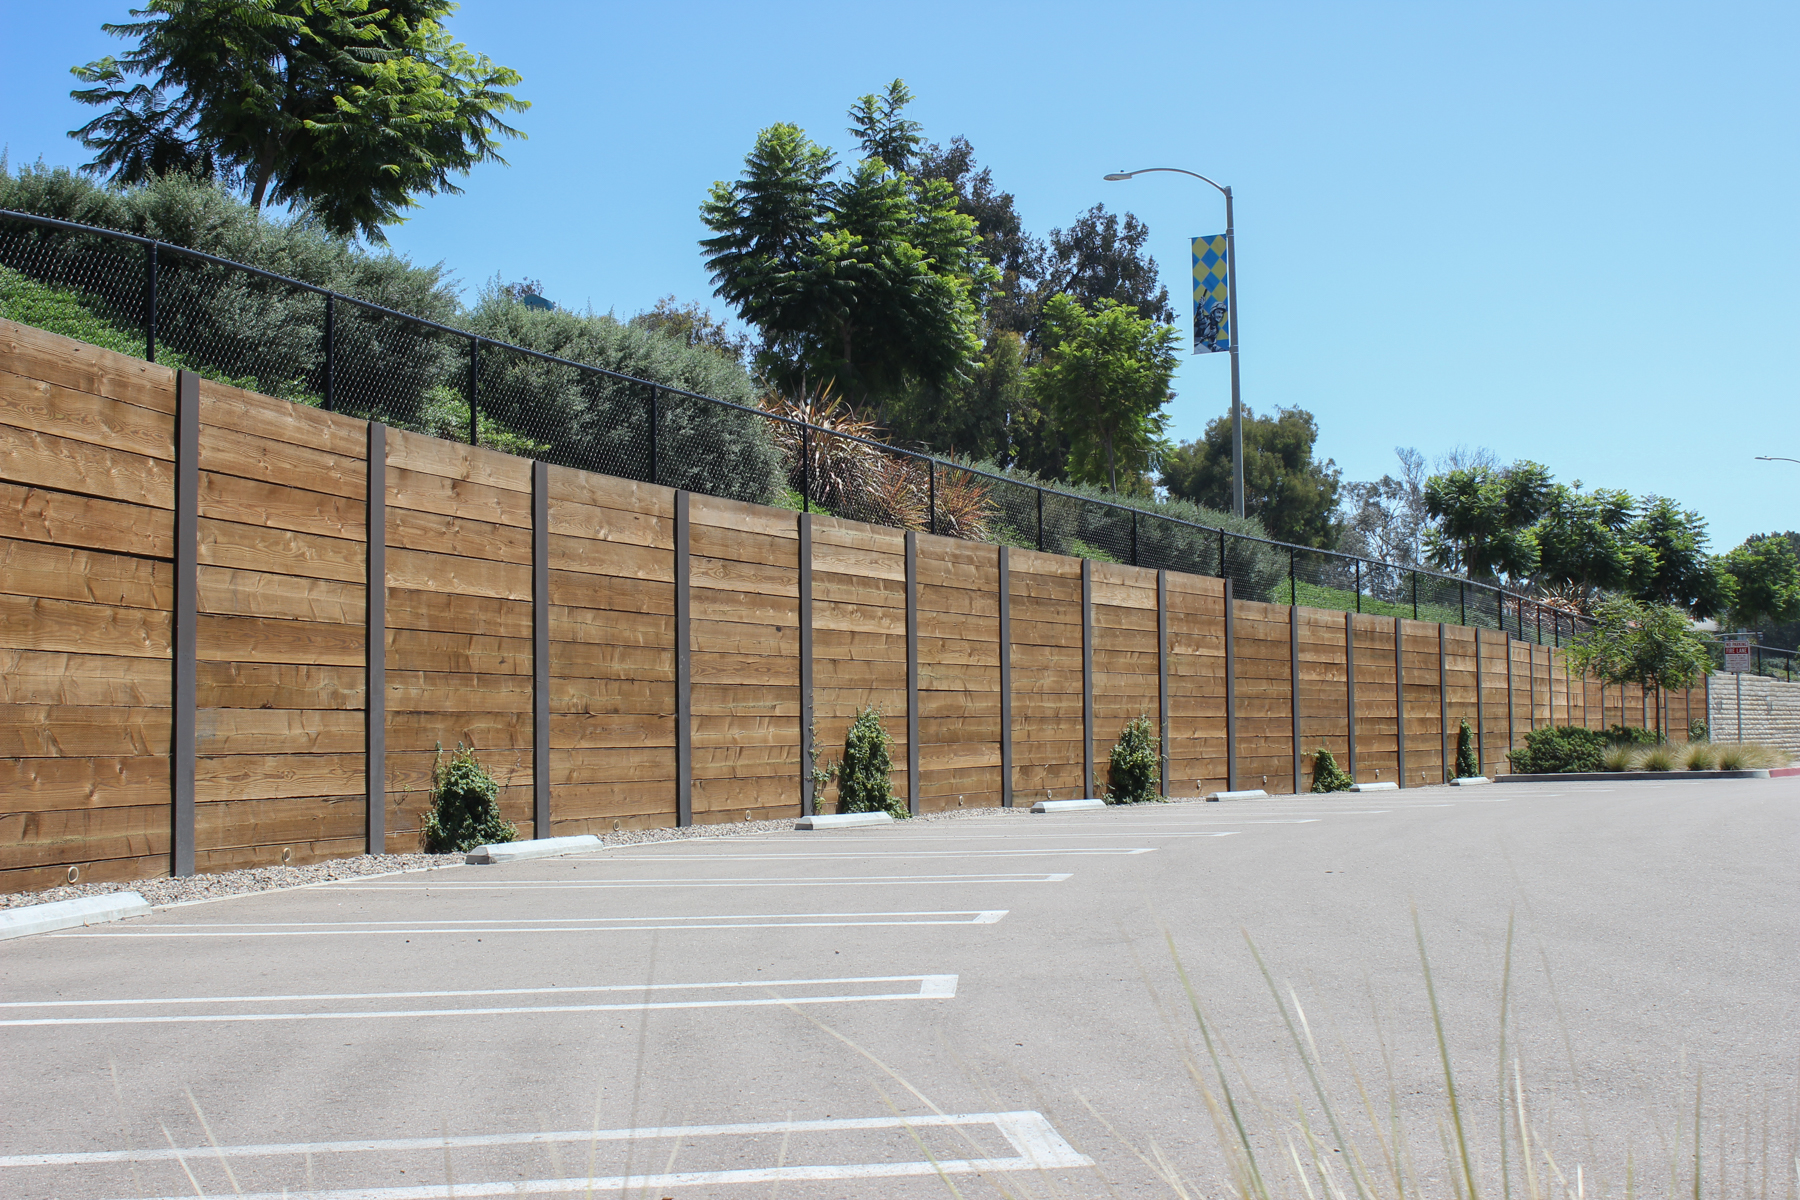 A custom wooden soldier pile shoring in a parking lot acts as a rustic retaining wall with bushes and trees peeking above.